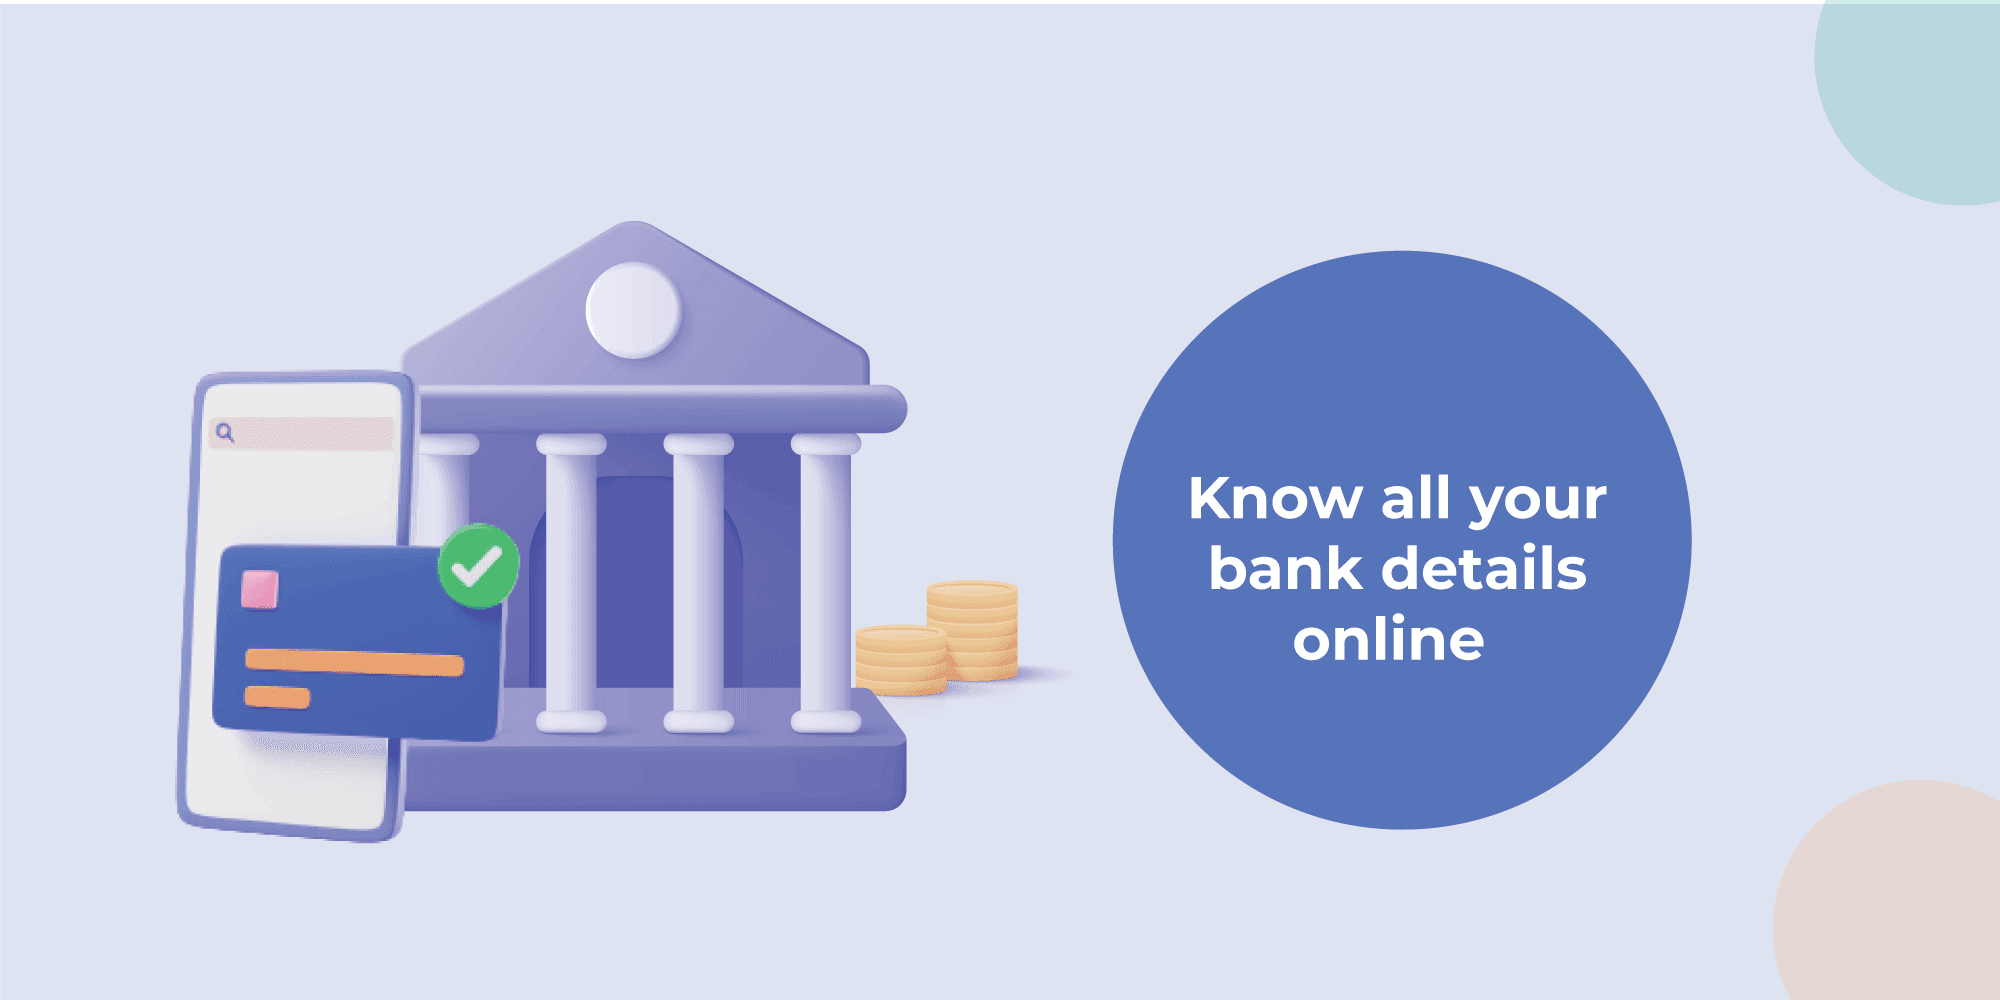 How to check my all loan details online?